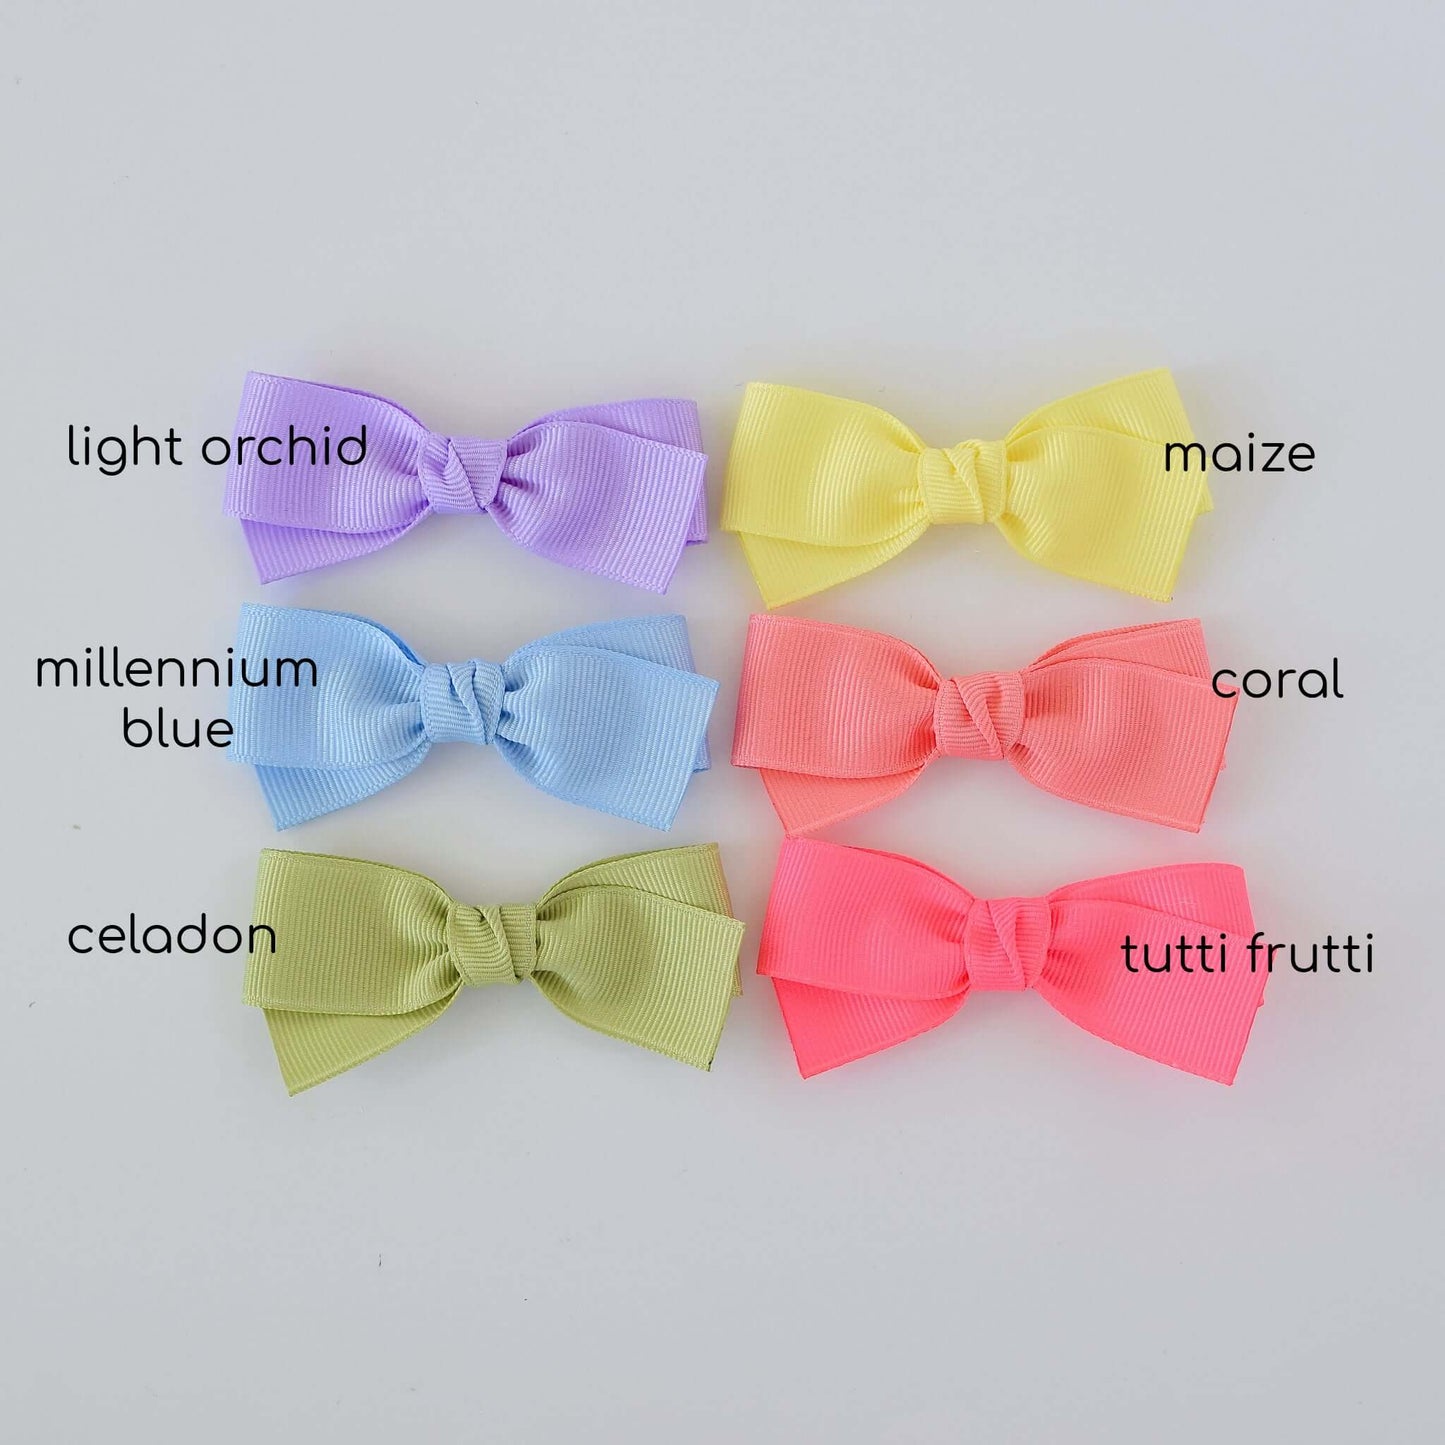 Pastel grosgrain Kayla bow clips in light orchid, maize, millennium blue, coral, celadon, and tutti frutti colors on display.